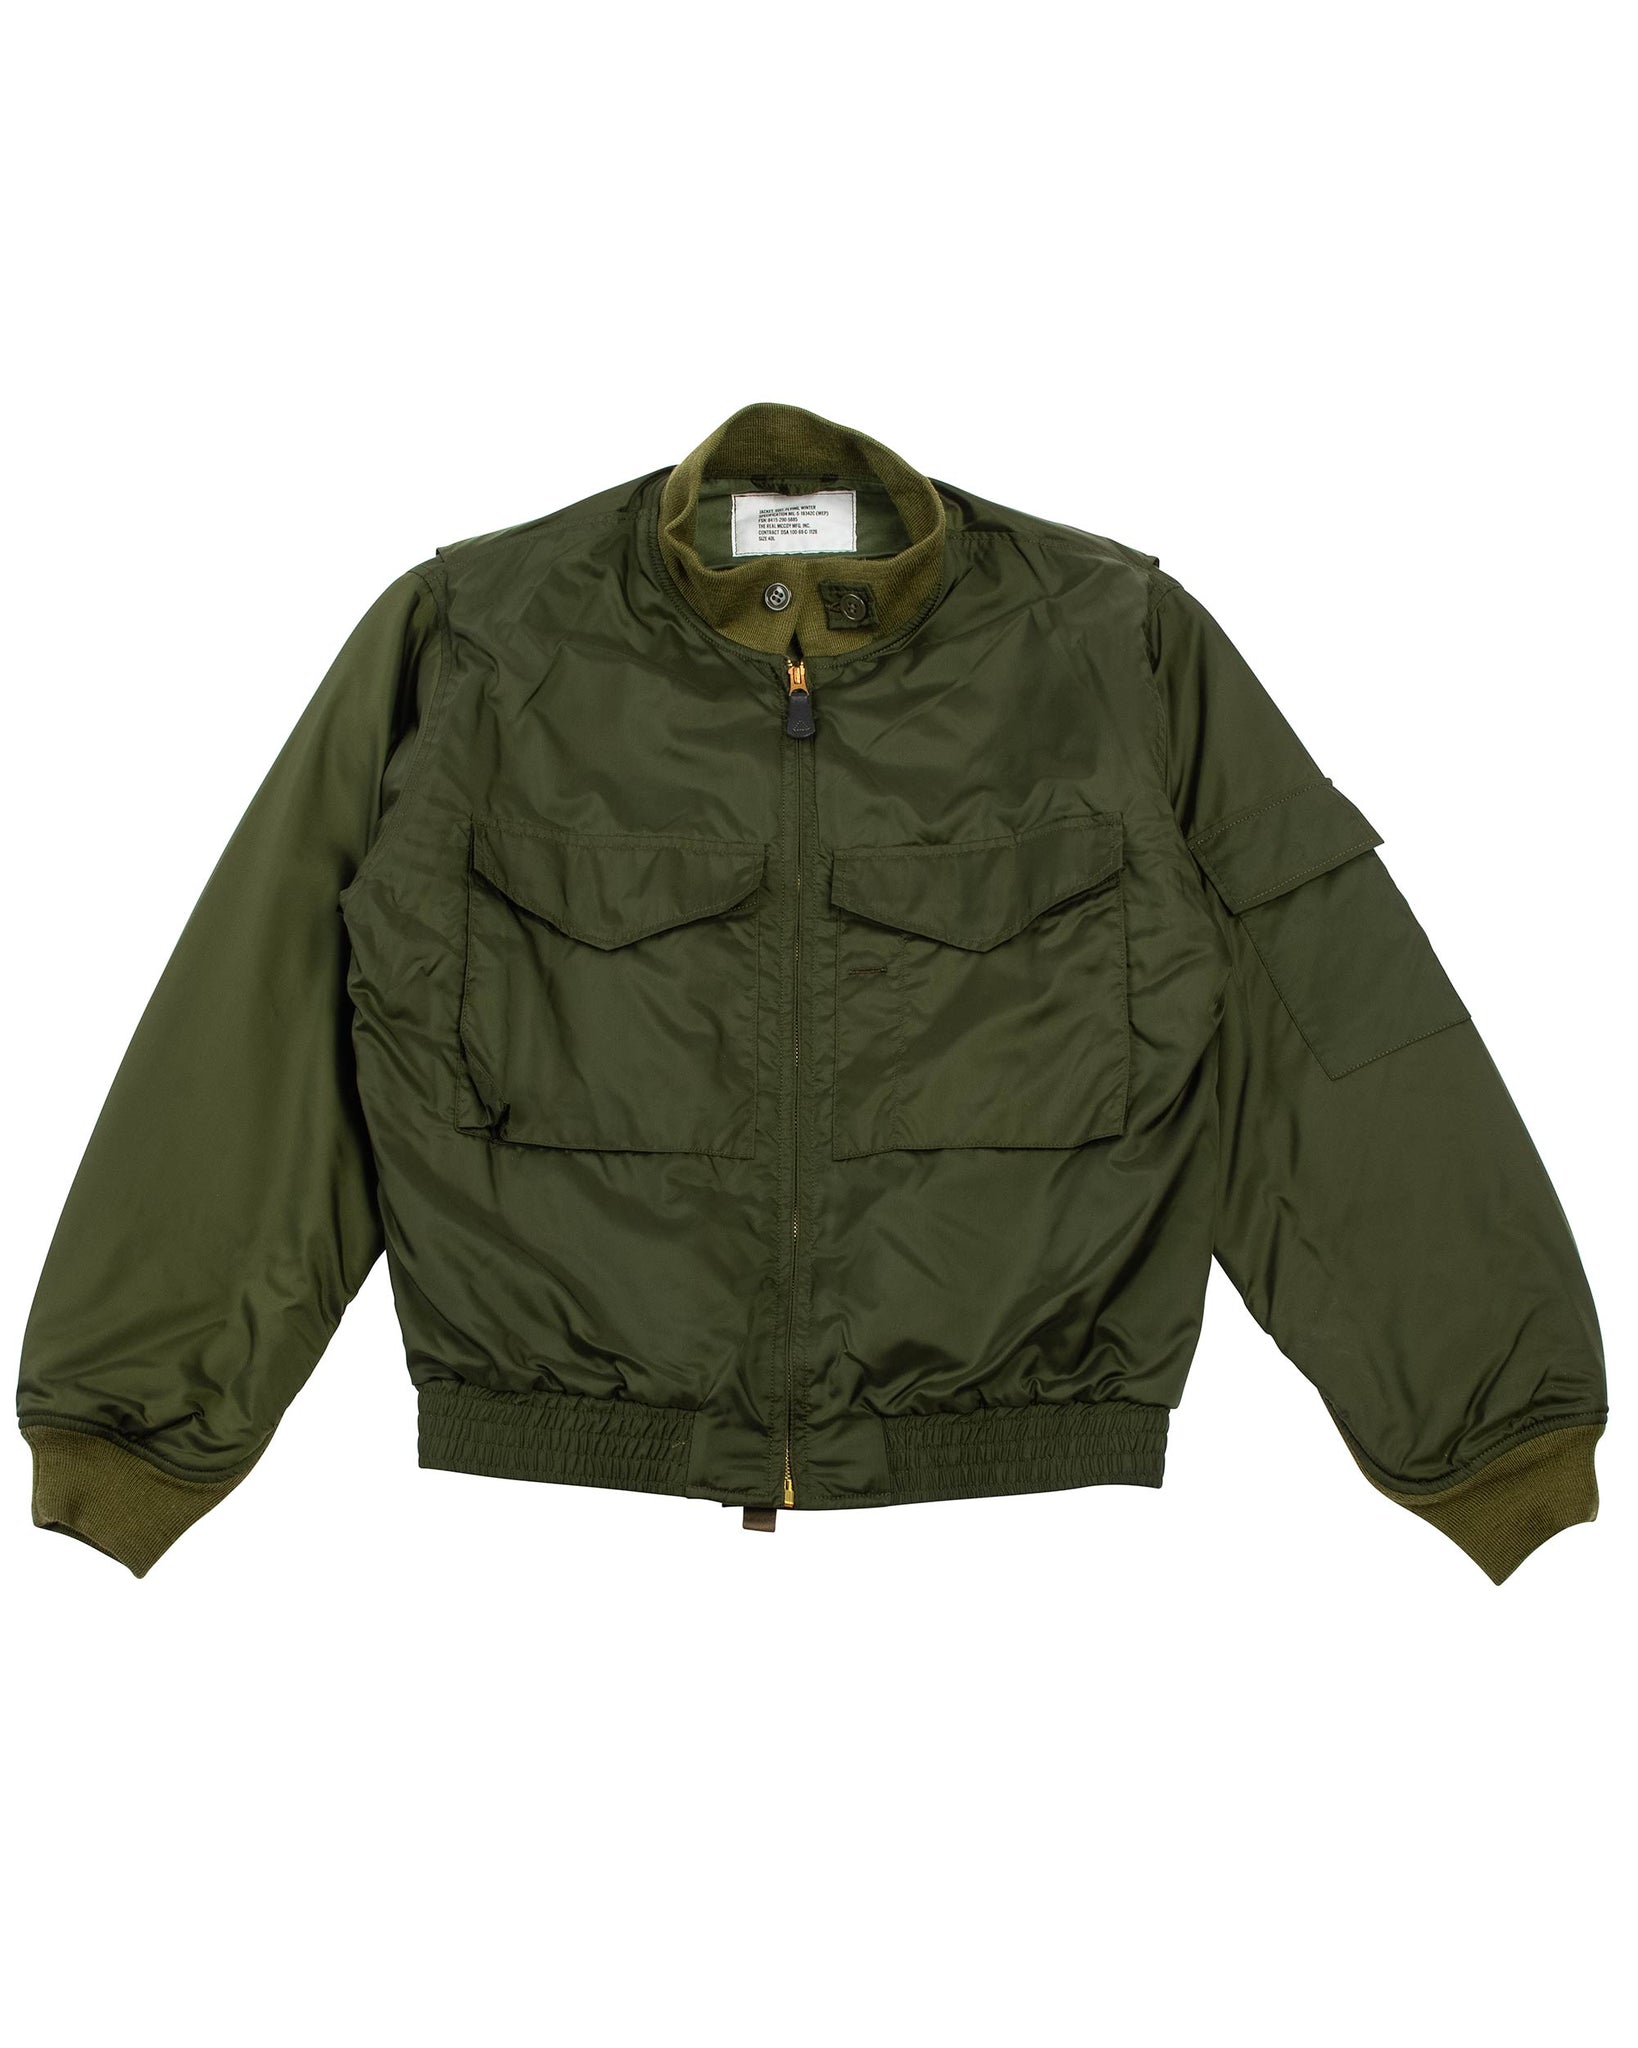 The Real McCoy's MJ22009 Jacket - Suit, Flying, Winter Olive